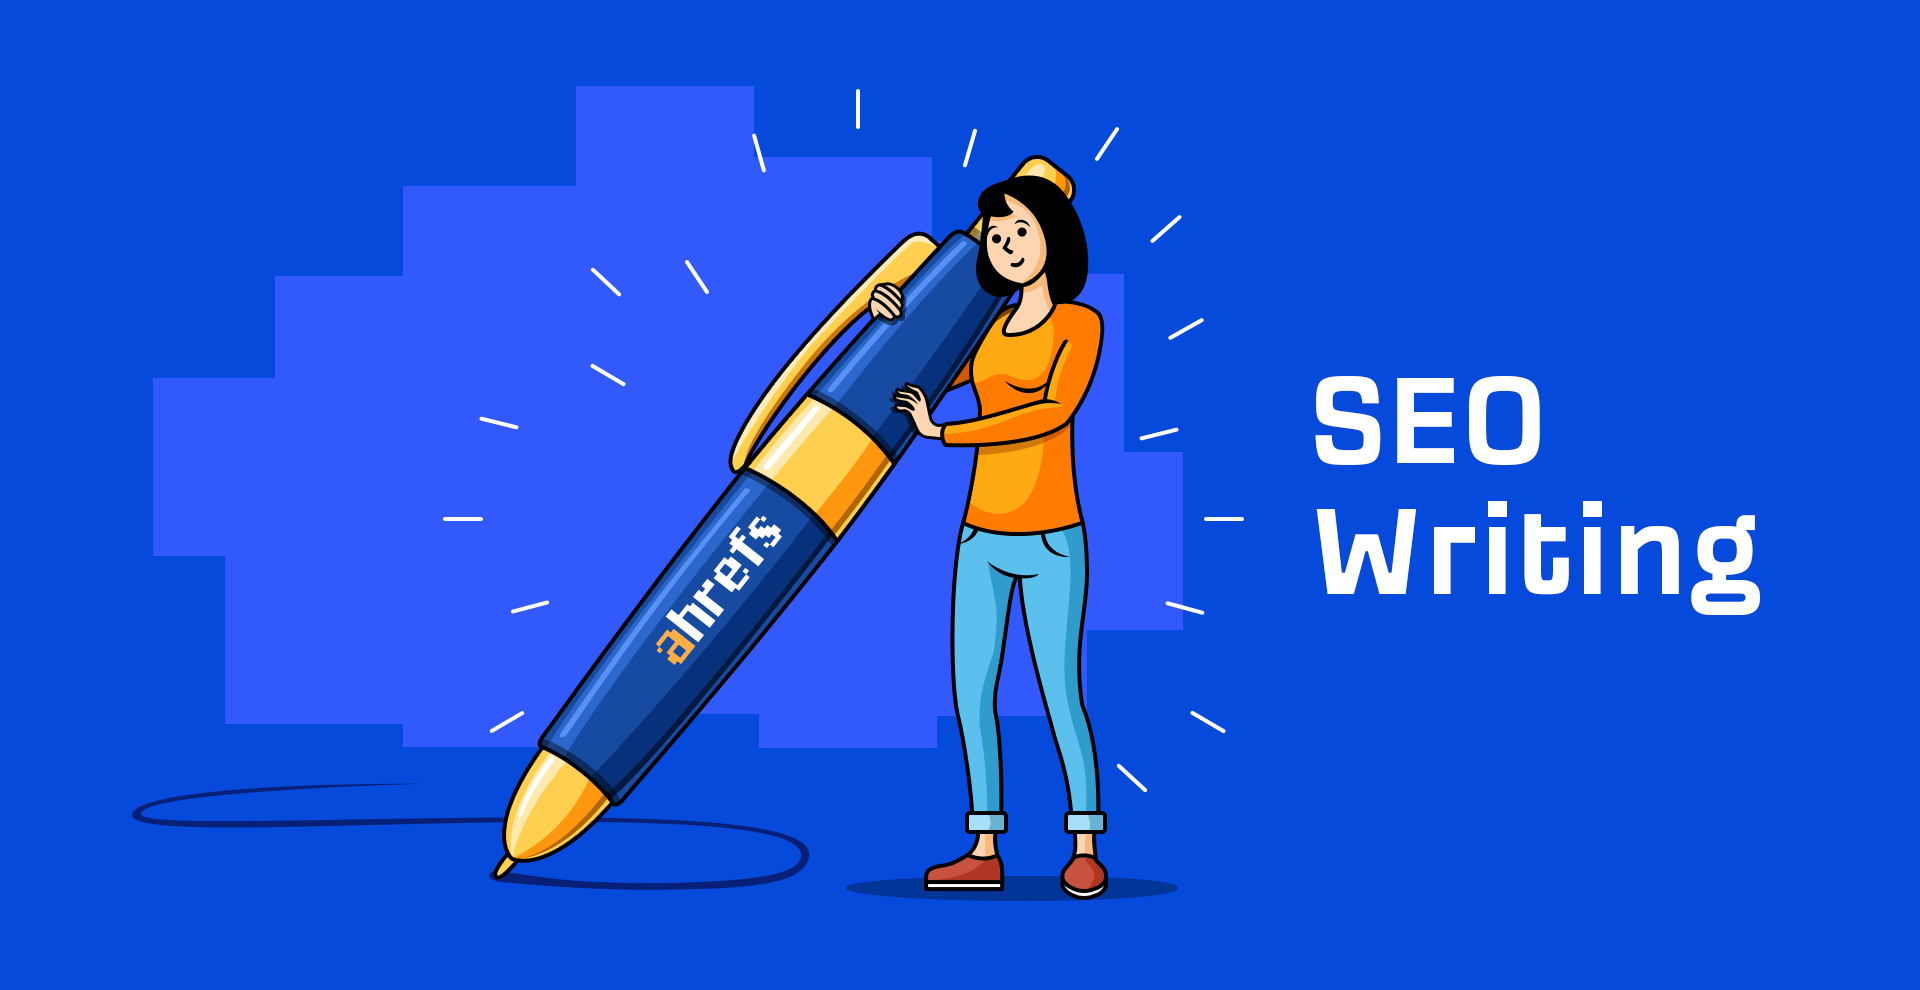 SEO Writing: 7 Steps to Create Search-Optimized Content